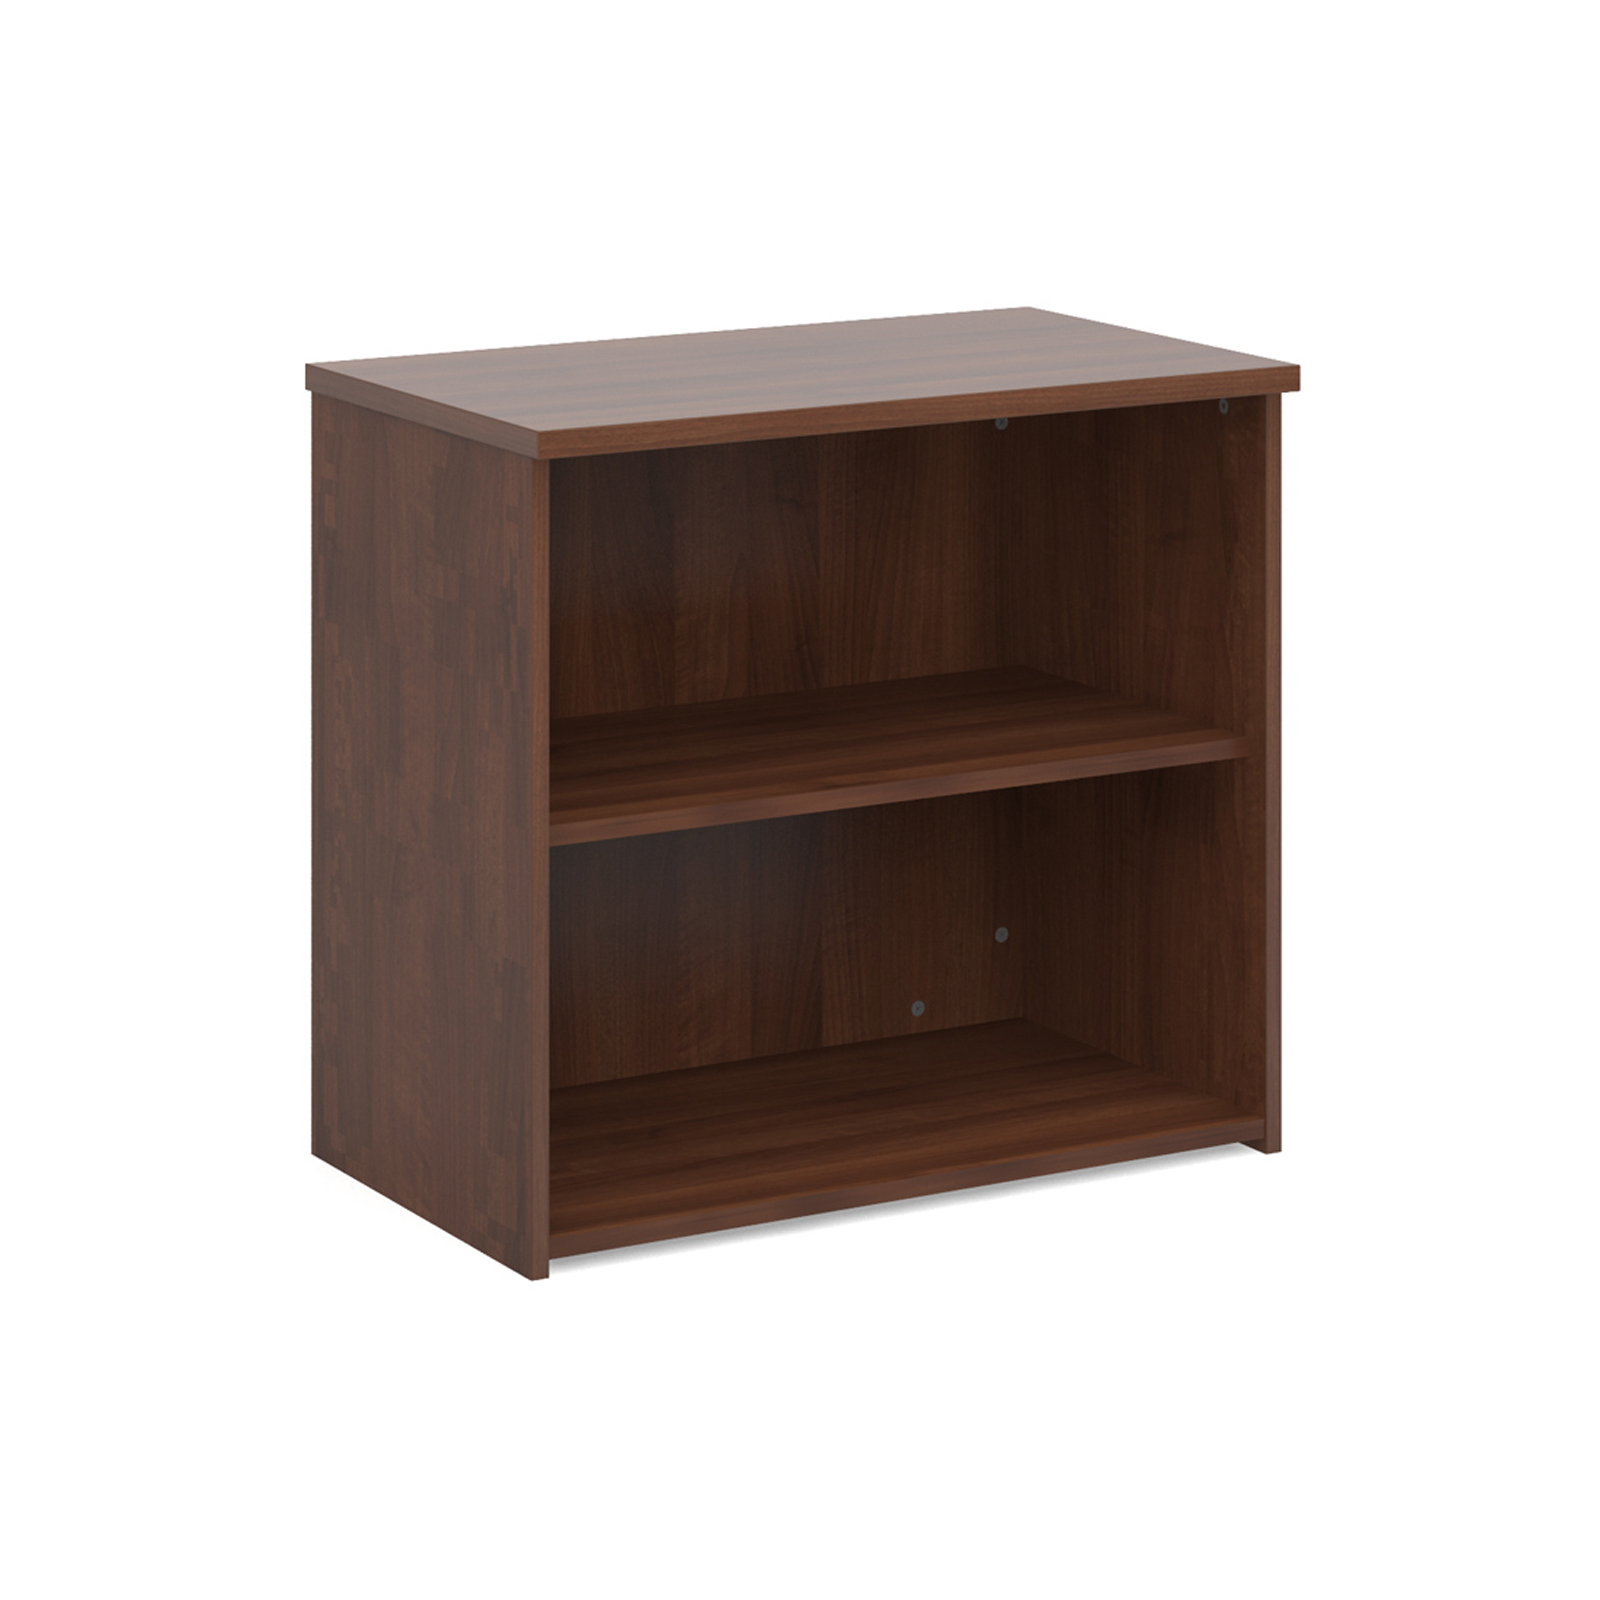 Up To 1200mm High Universal bookcase 740mm high with 1 shelf - walnut